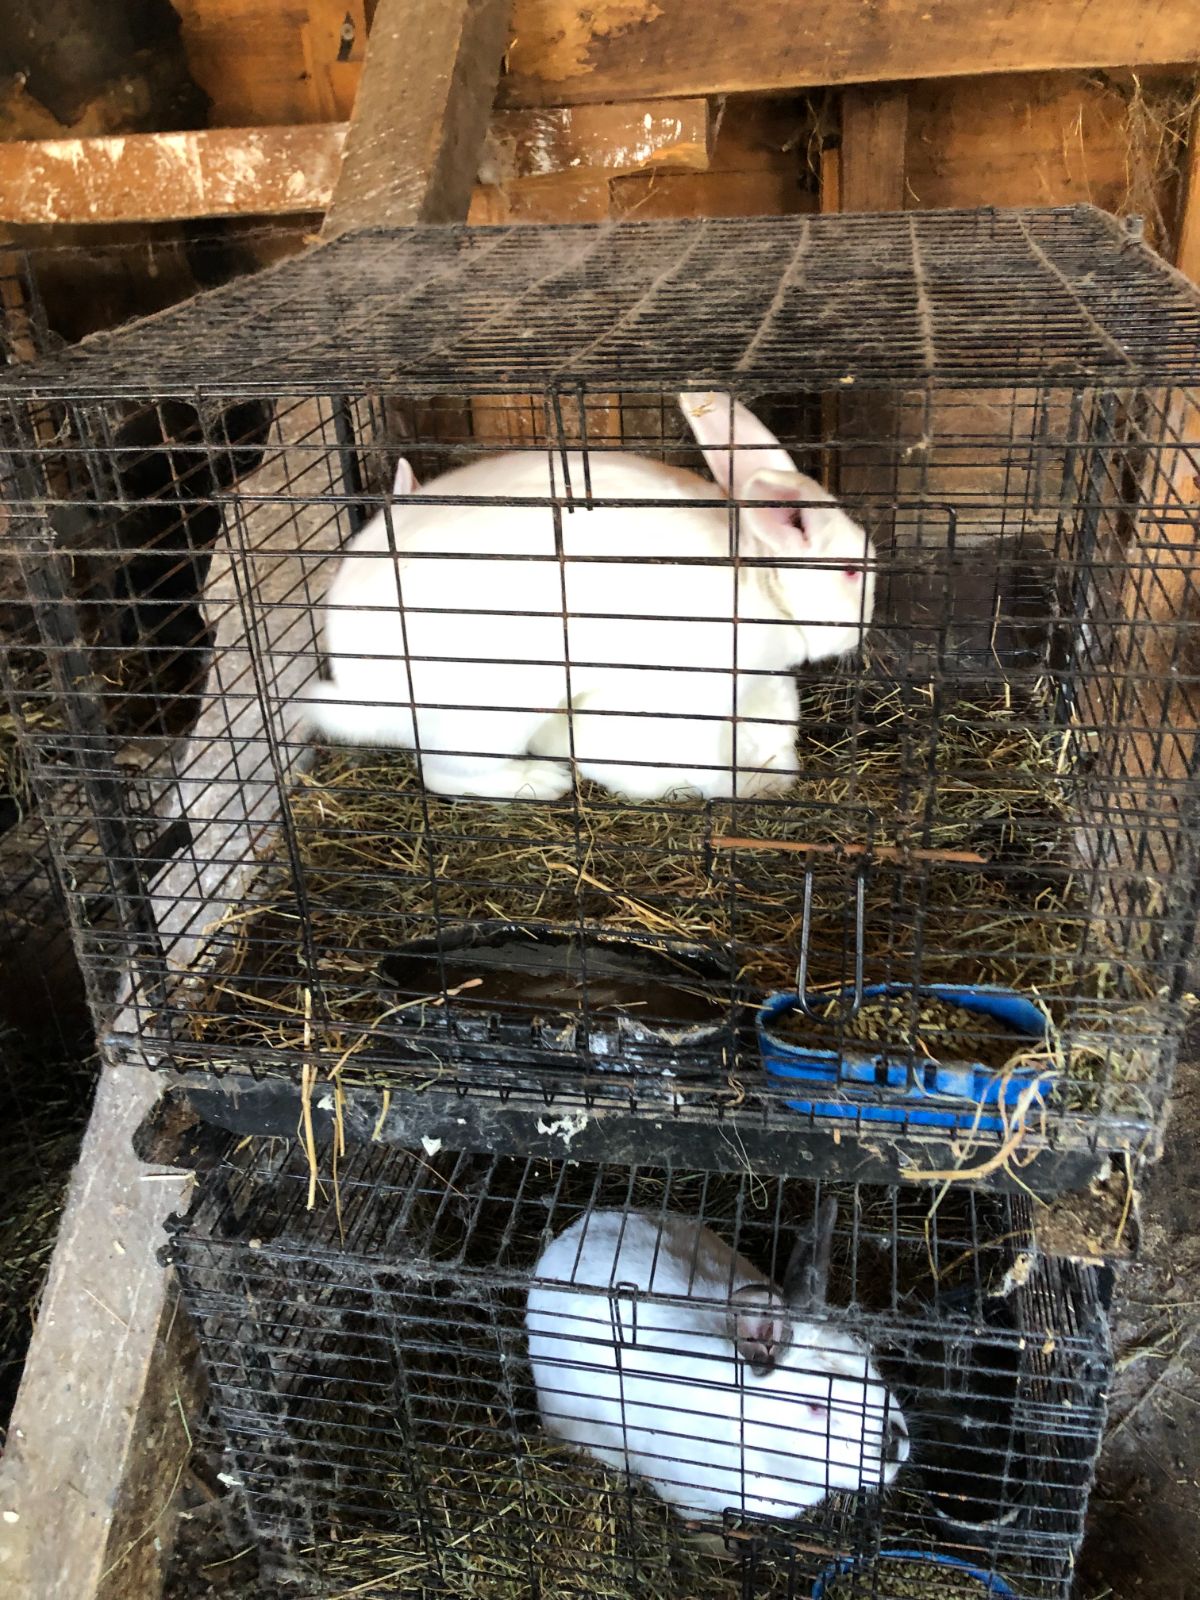 Meat rabbits in stacked cages